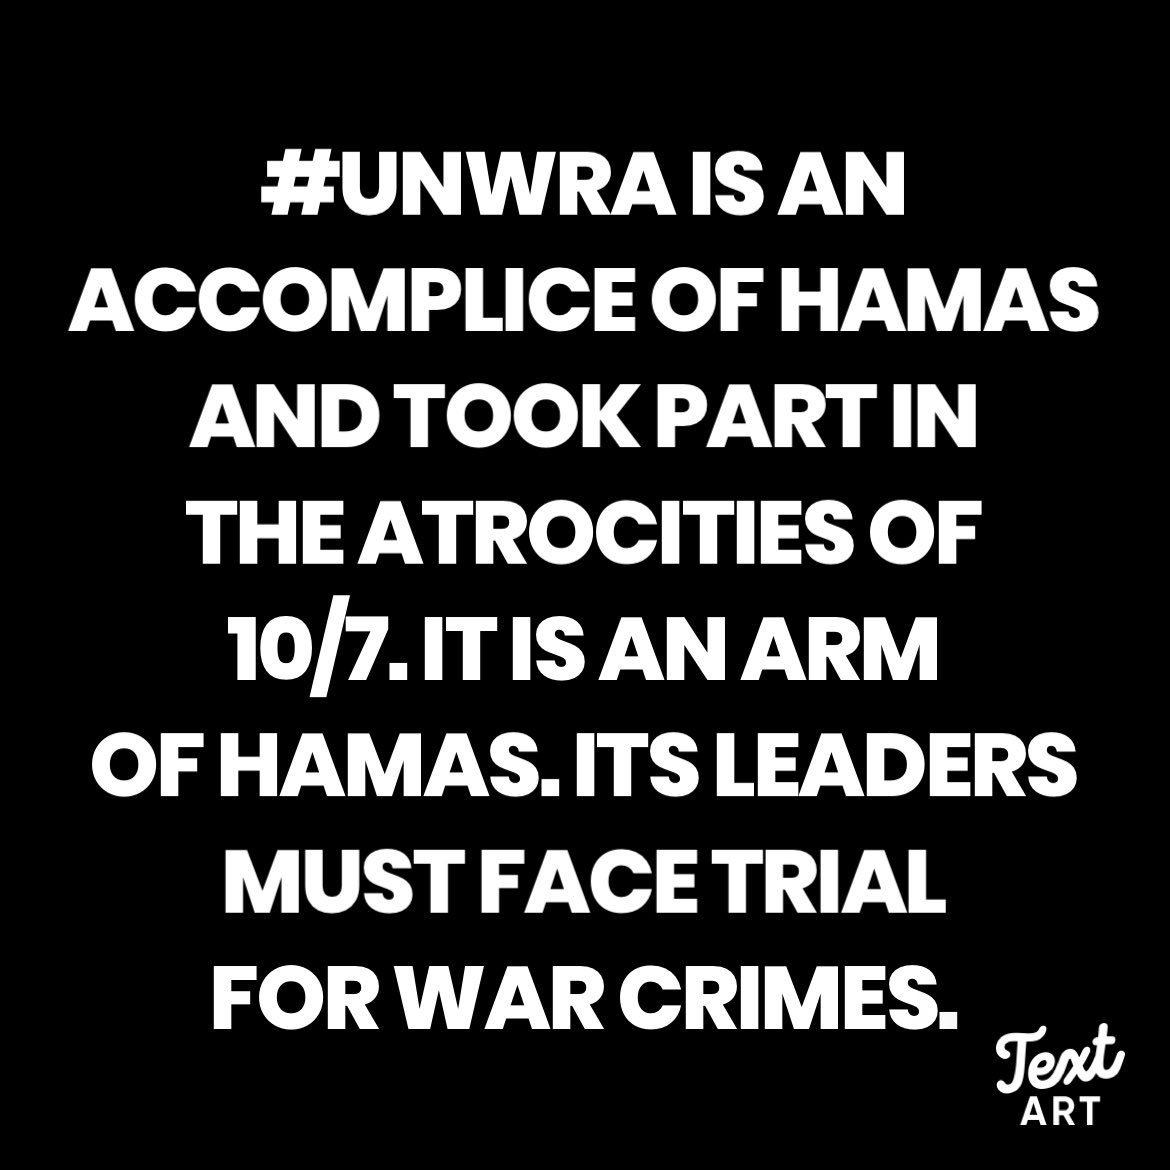 @UNRWA @ScottAnderGaza @BBCWorld #UNWRA used its facilities to hide Hamas tunnels, allowed rockets to be fired from their grounds and taught hatred of Jews to generations of Palestinians. UNWRA is not the solution, it is a major part of the problem.